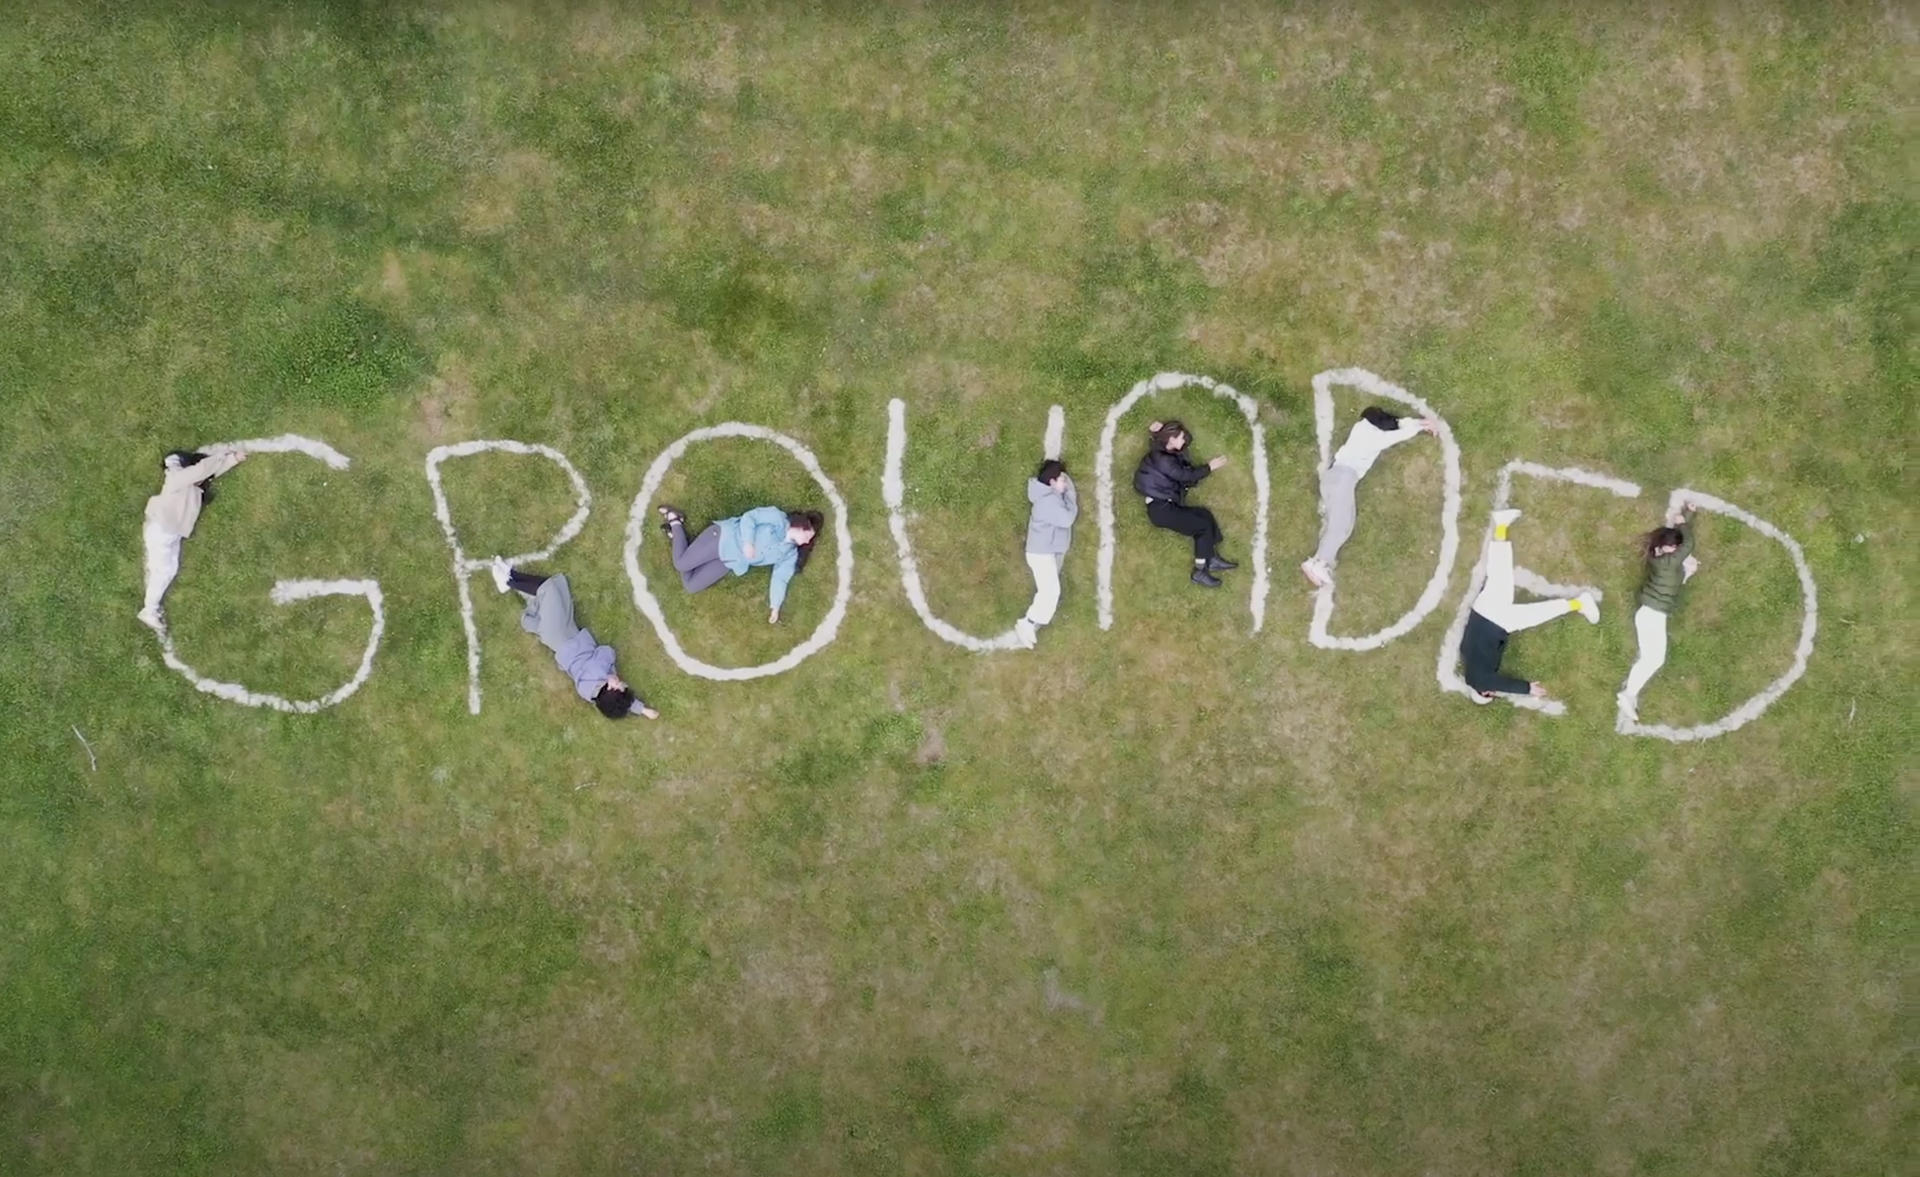 Aerial photo of a field of grass with the word "grounded" spelled out. Human figures lay on the ground, interacting with the letters.